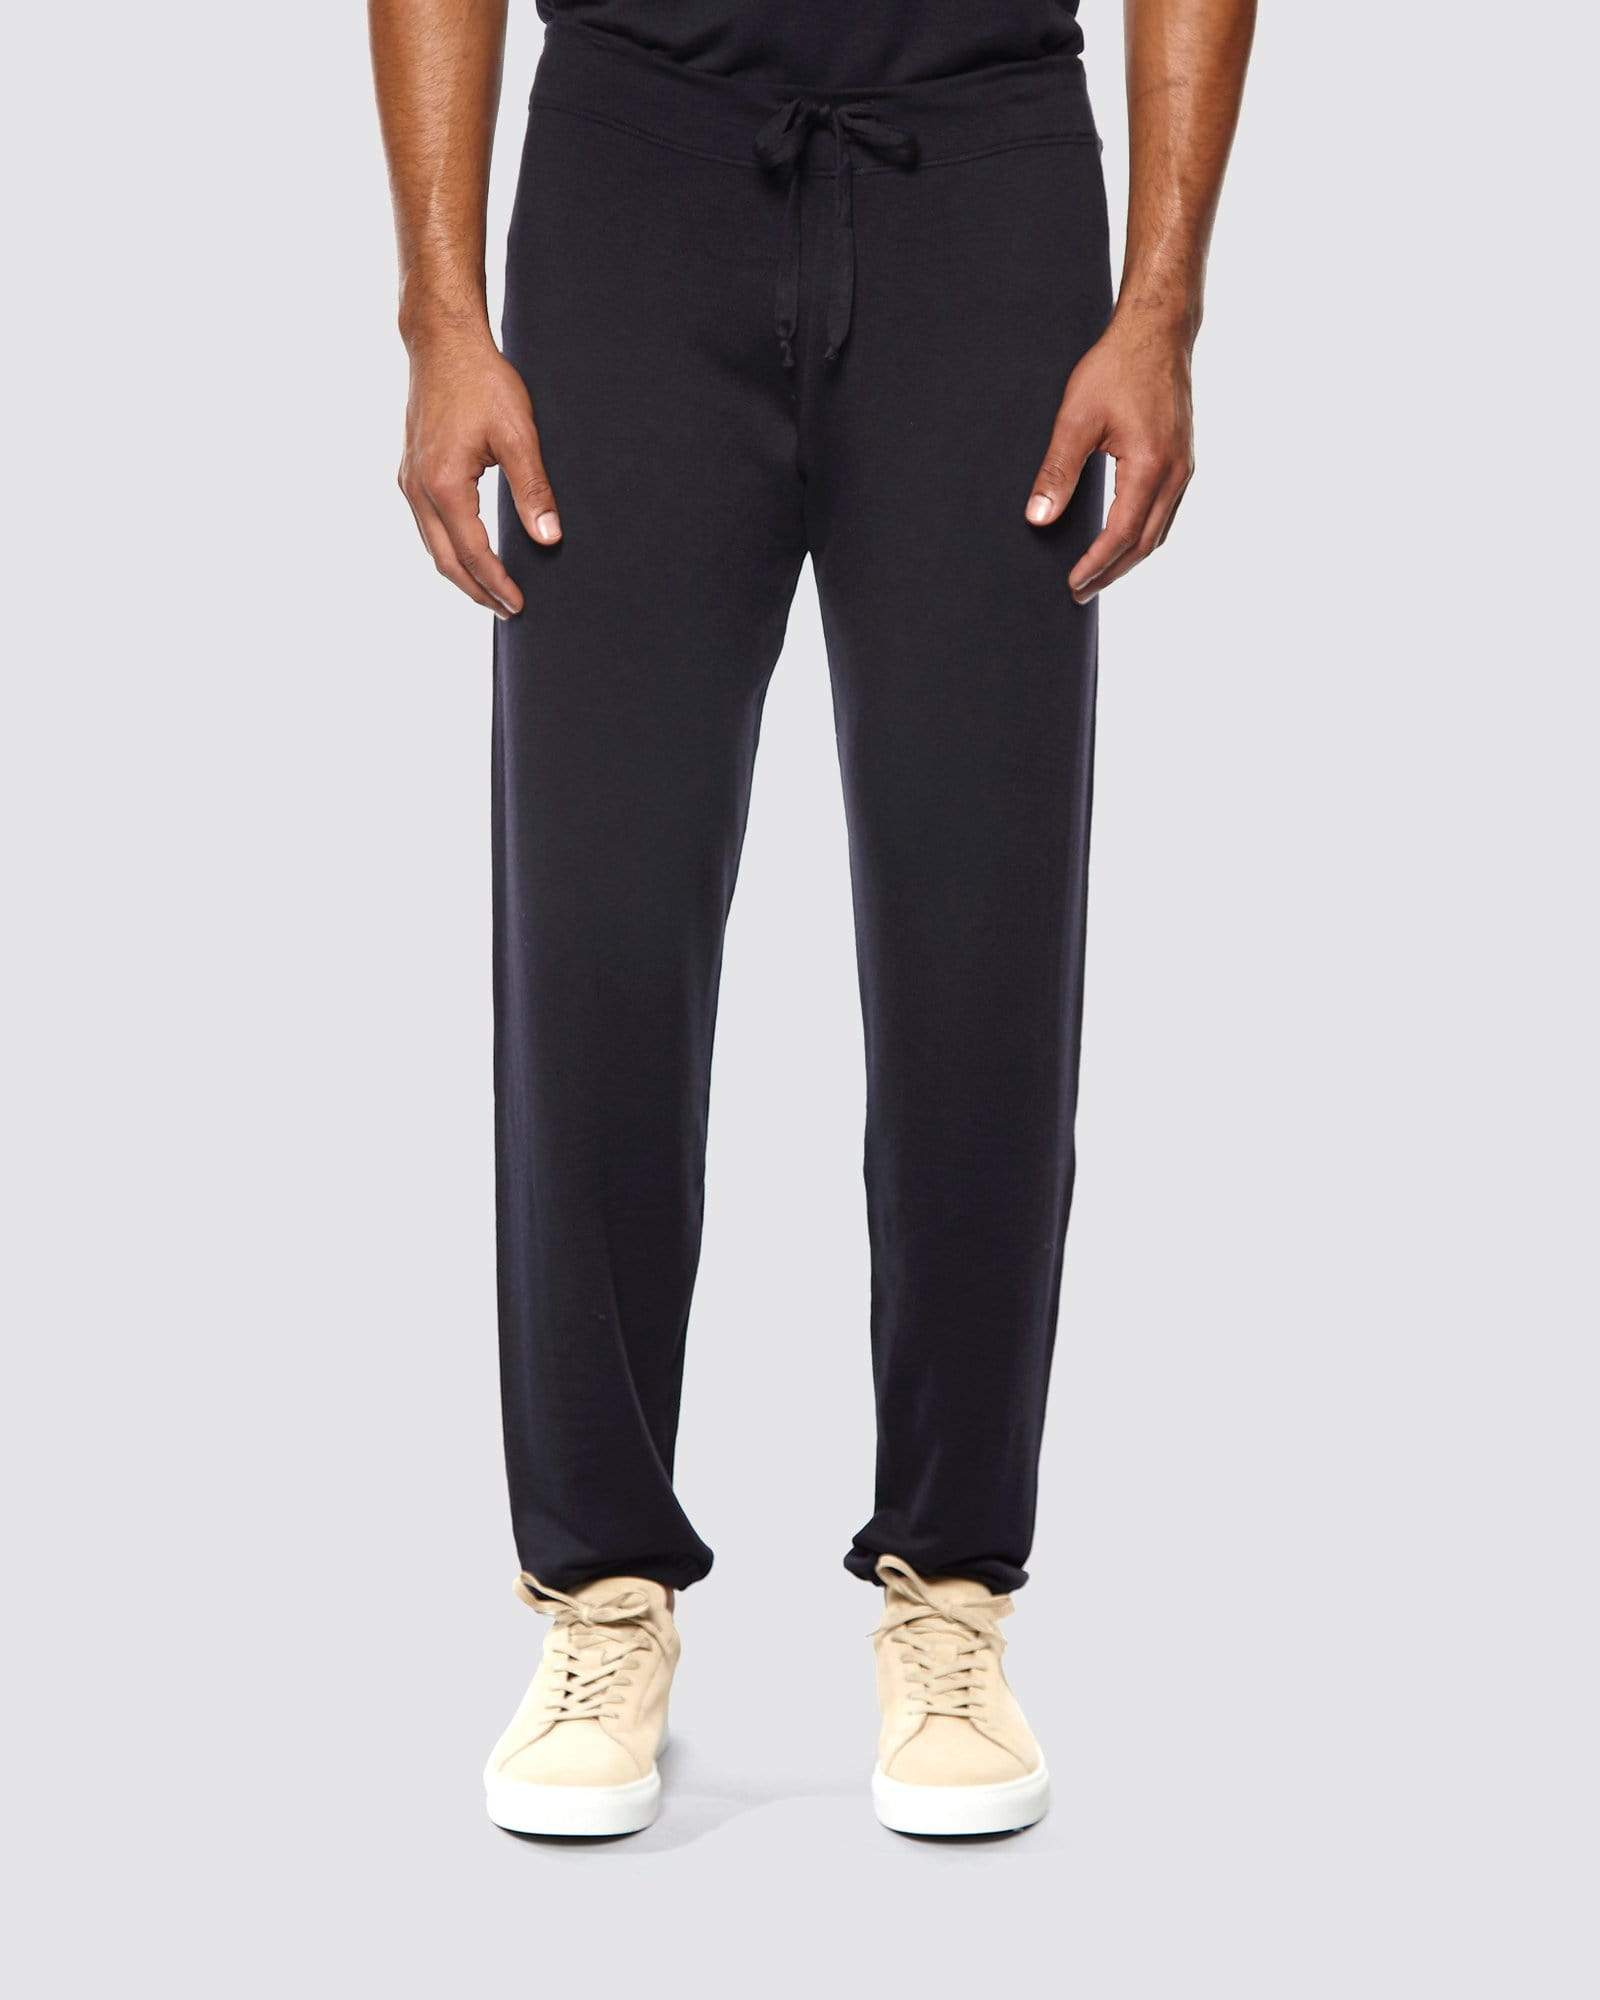 F_Gotal Men's Classic French Terry Jogger Sweatpant Jogger Pants Trouser  Black at  Men's Clothing store